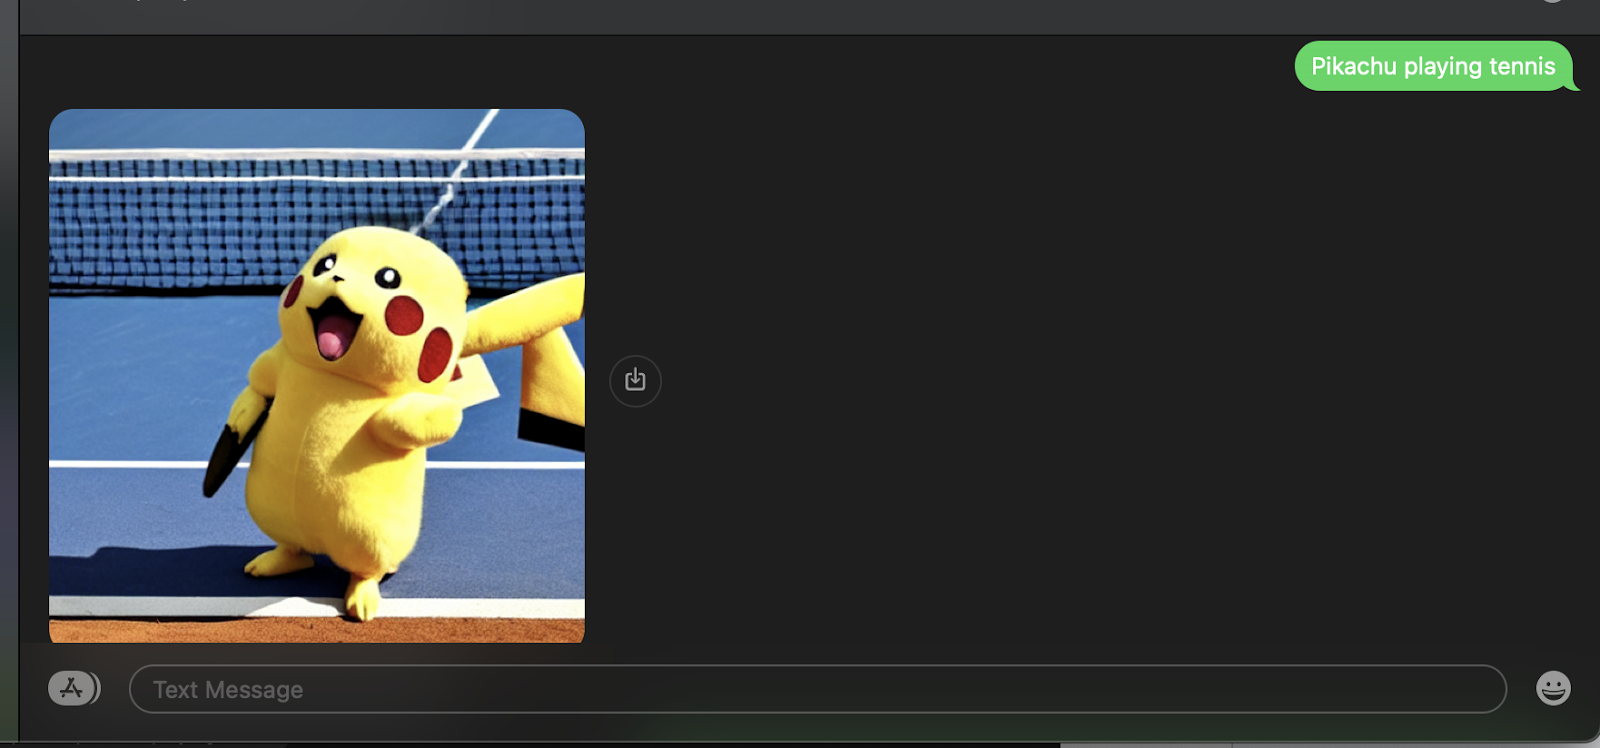 Another SMS example where I texted in "pikachu playing tennis" and the image returned is of Pikachu on a tennis court